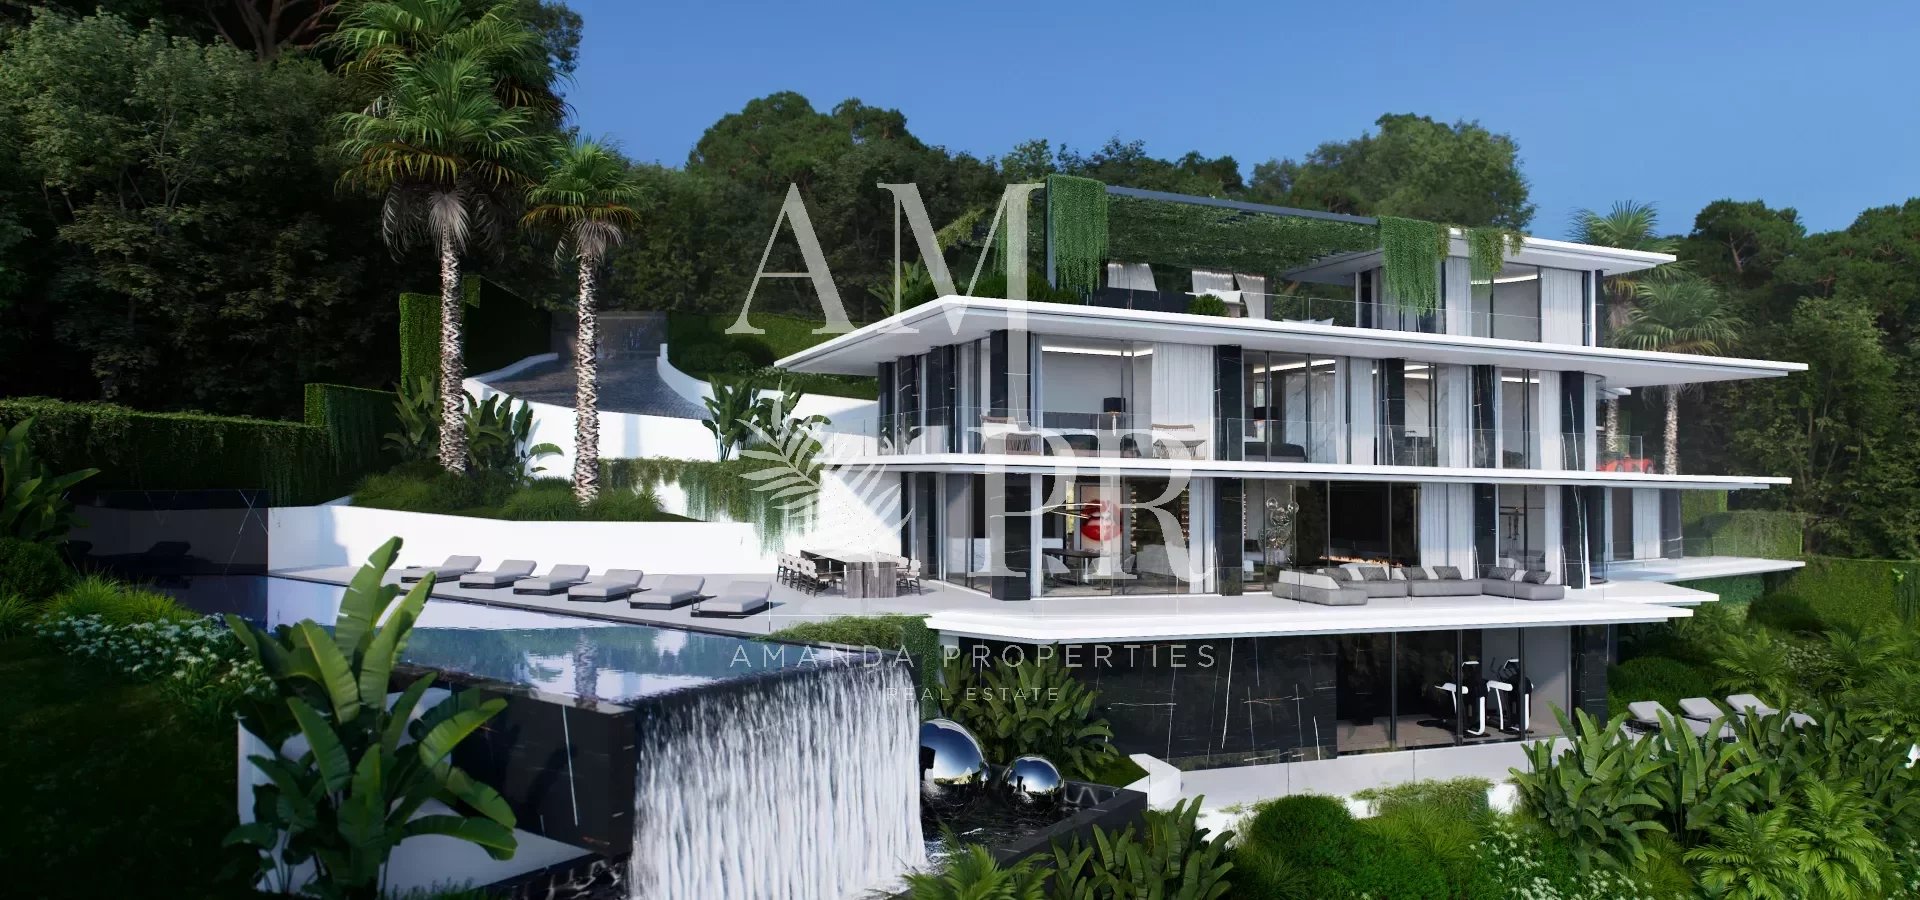 SUPER CANNES - OUTSTANDING NEW VILLA - PANORAMIC SEA VIEW